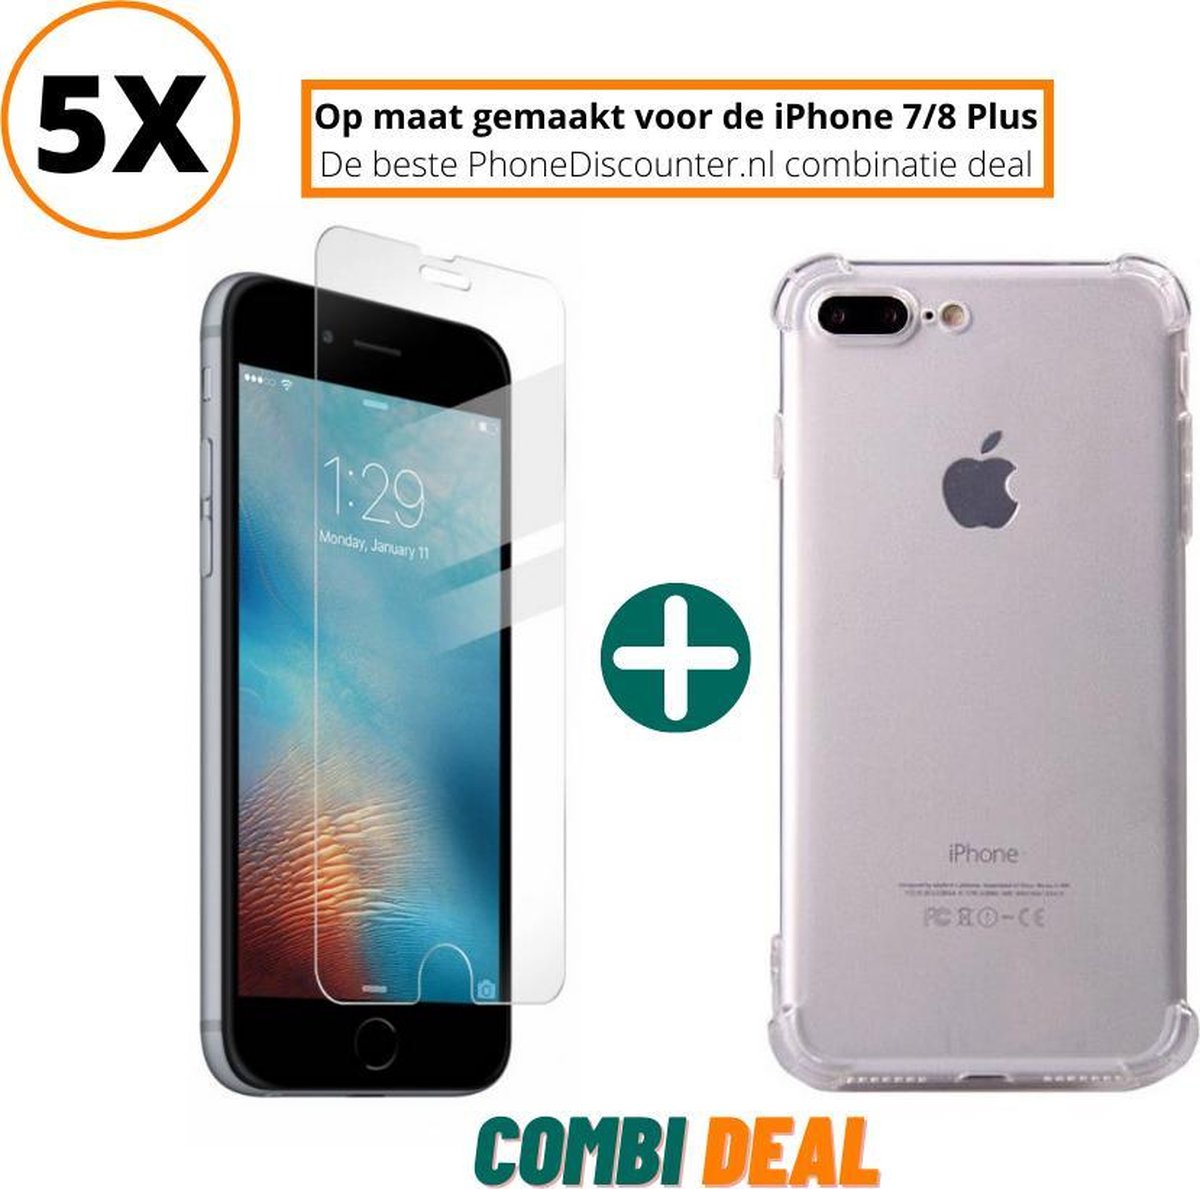 iphone 7 plus anti shock hoes | iPhone 7 Plus A1785 siliconen case | iPhone 7 Plus anti shock case transparant | beschermhoes iphone 7 plus apple | iPhone 7 Plus schokbestendige hoes + 5x iPhone 7 Plus tempered glass screenprotector